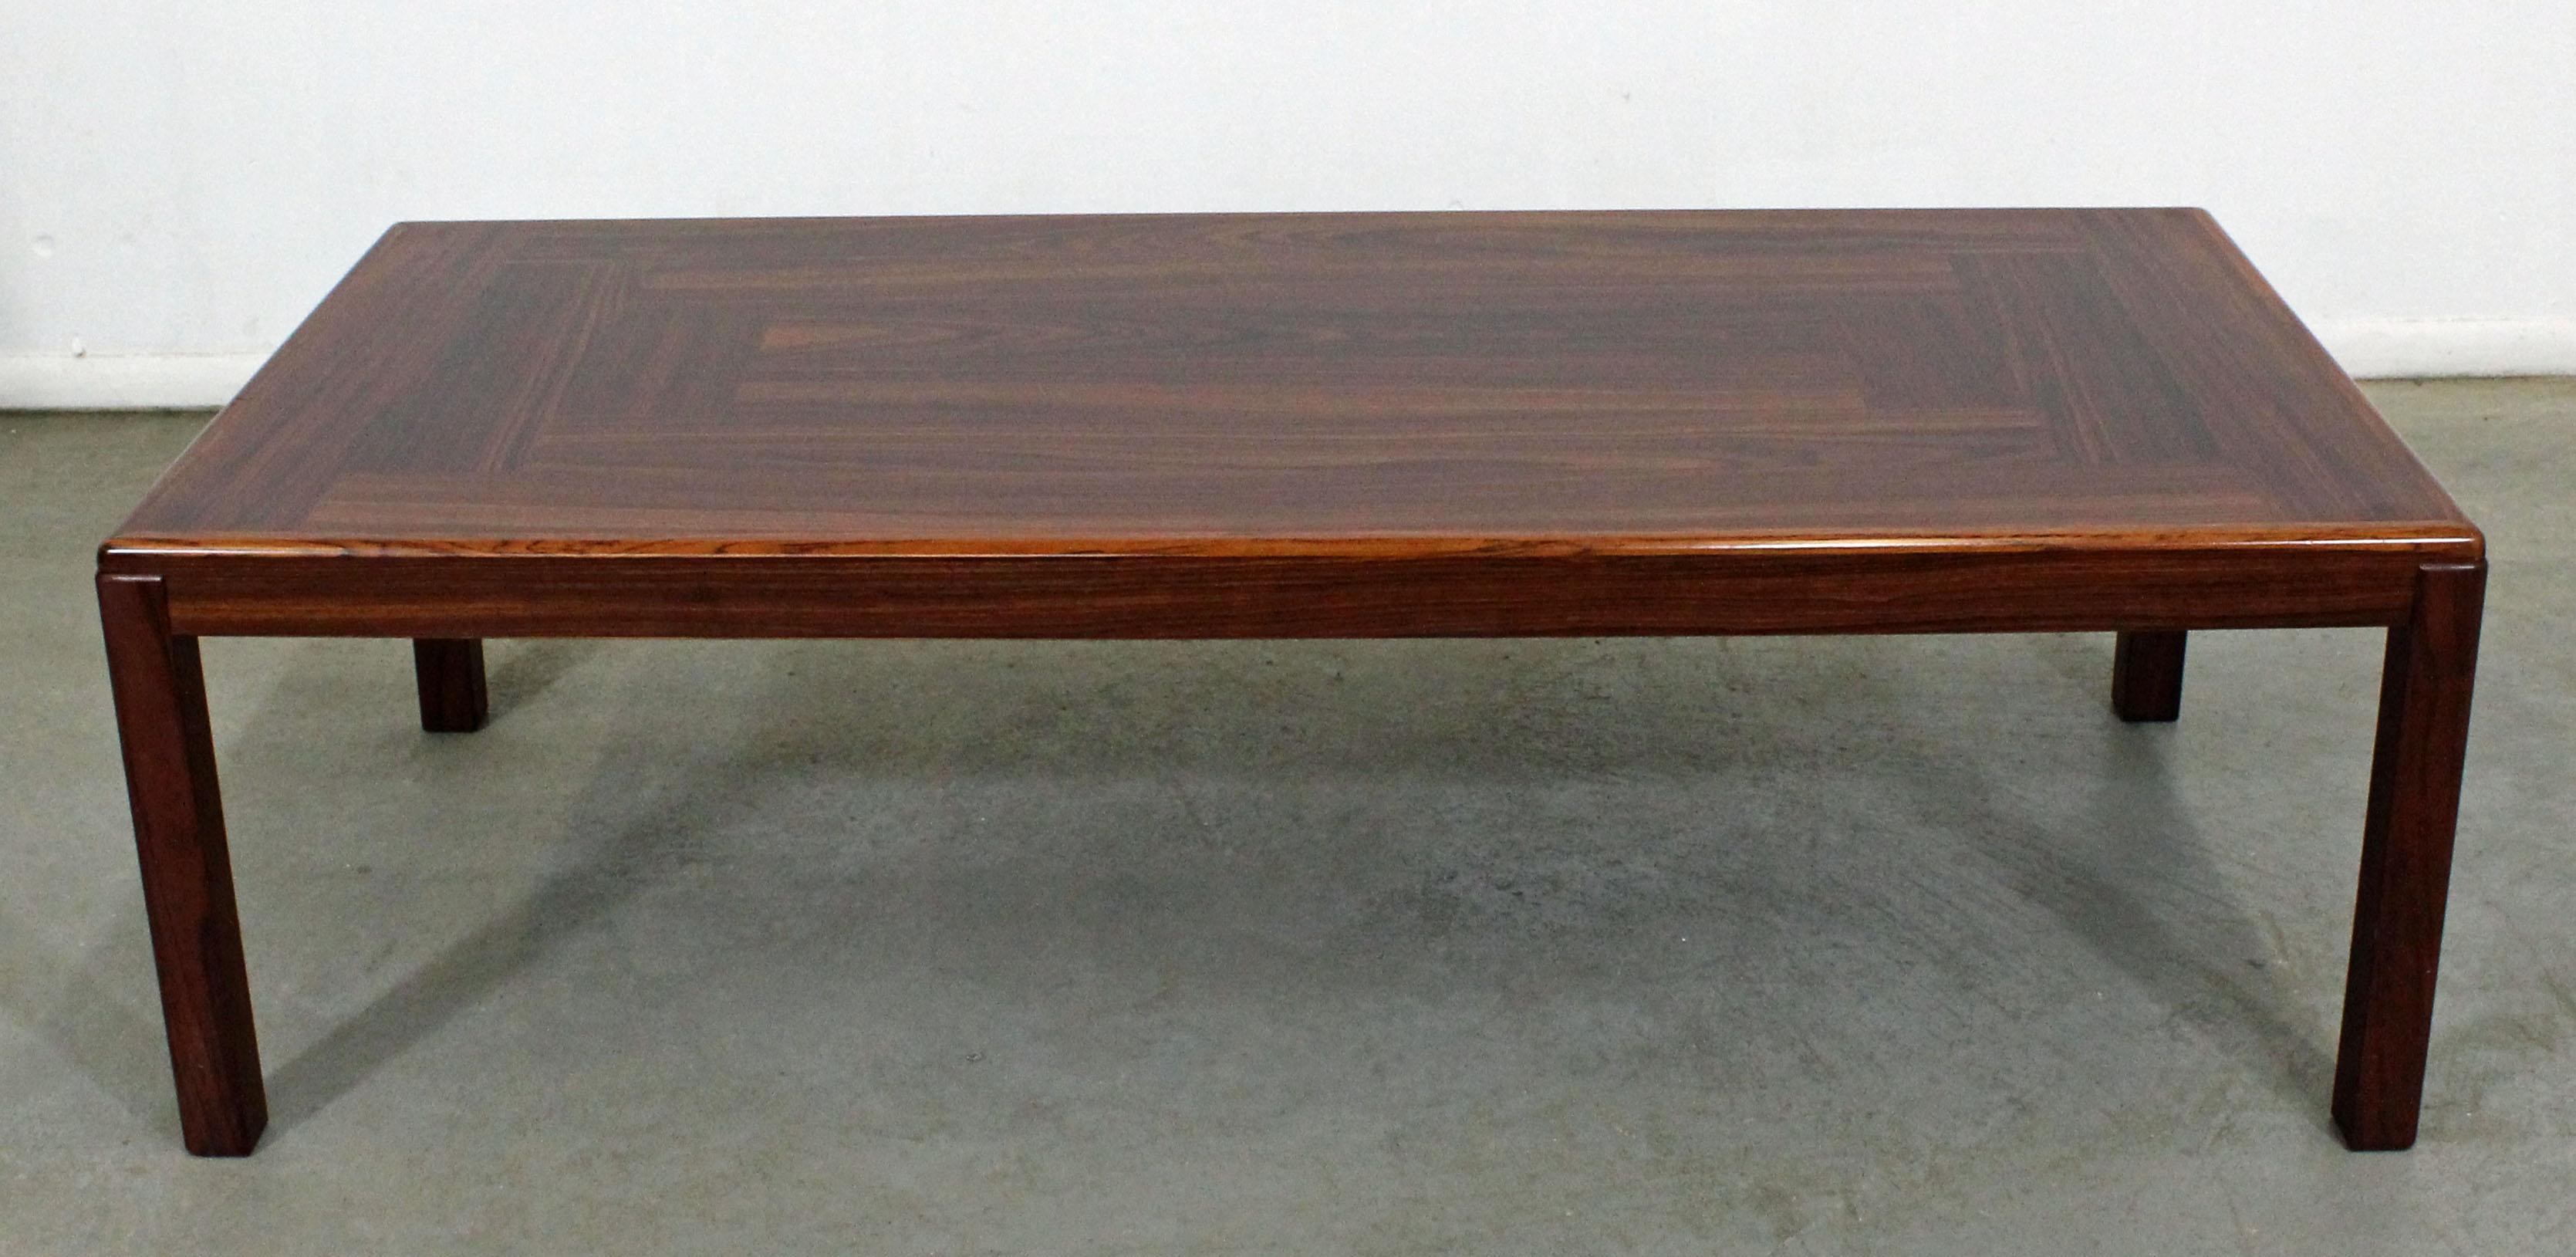 Mid-Century Danish modern Vejle Stole parquet top rosewood coffee table

Offered is a beautiful Danish modern rosewood coffee table with a parquet top made by Vejle Stole Mobelfabrik. It is in excellent condition, almost like new, showing little